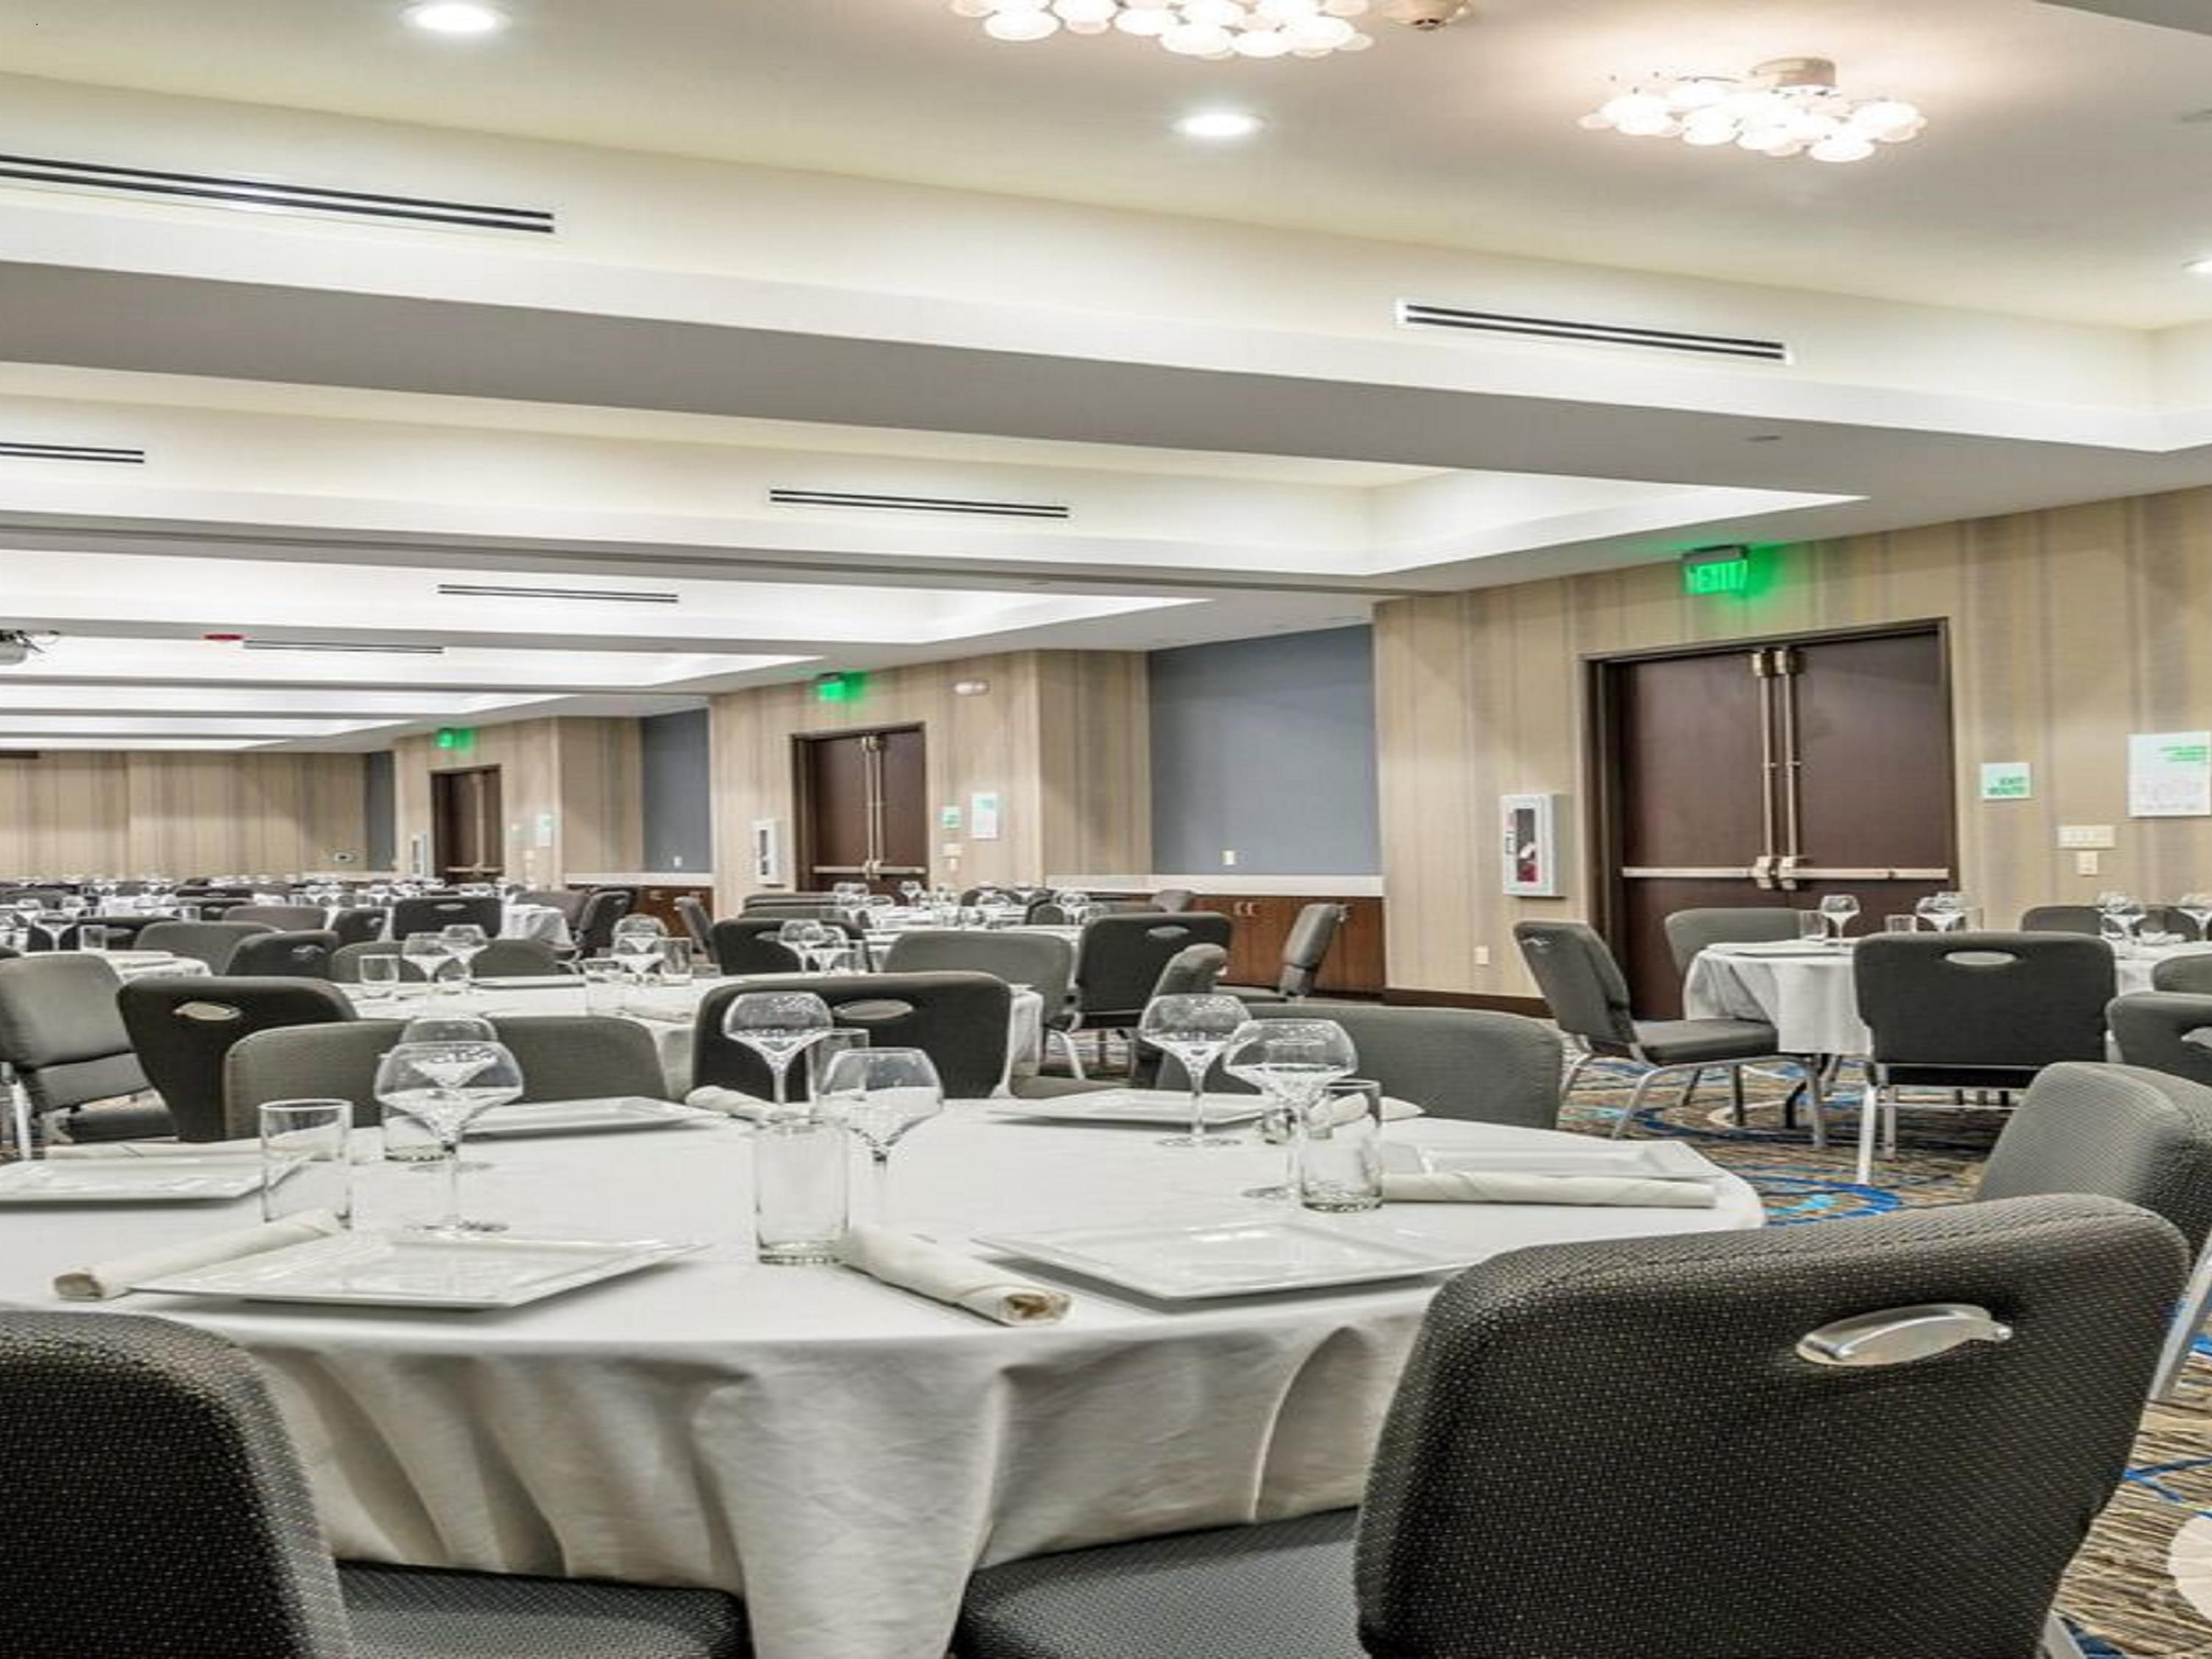 With  3000 square feet of flexible meeting spaces, state-of-the-art technology, customized menus, personalized services, uninterrupted internet connectivity, our venue is ideal for intimate weddings, socials, conferences, and celebrations. Special Group Rates are also available.  Contact our Sales Department  for more information.
